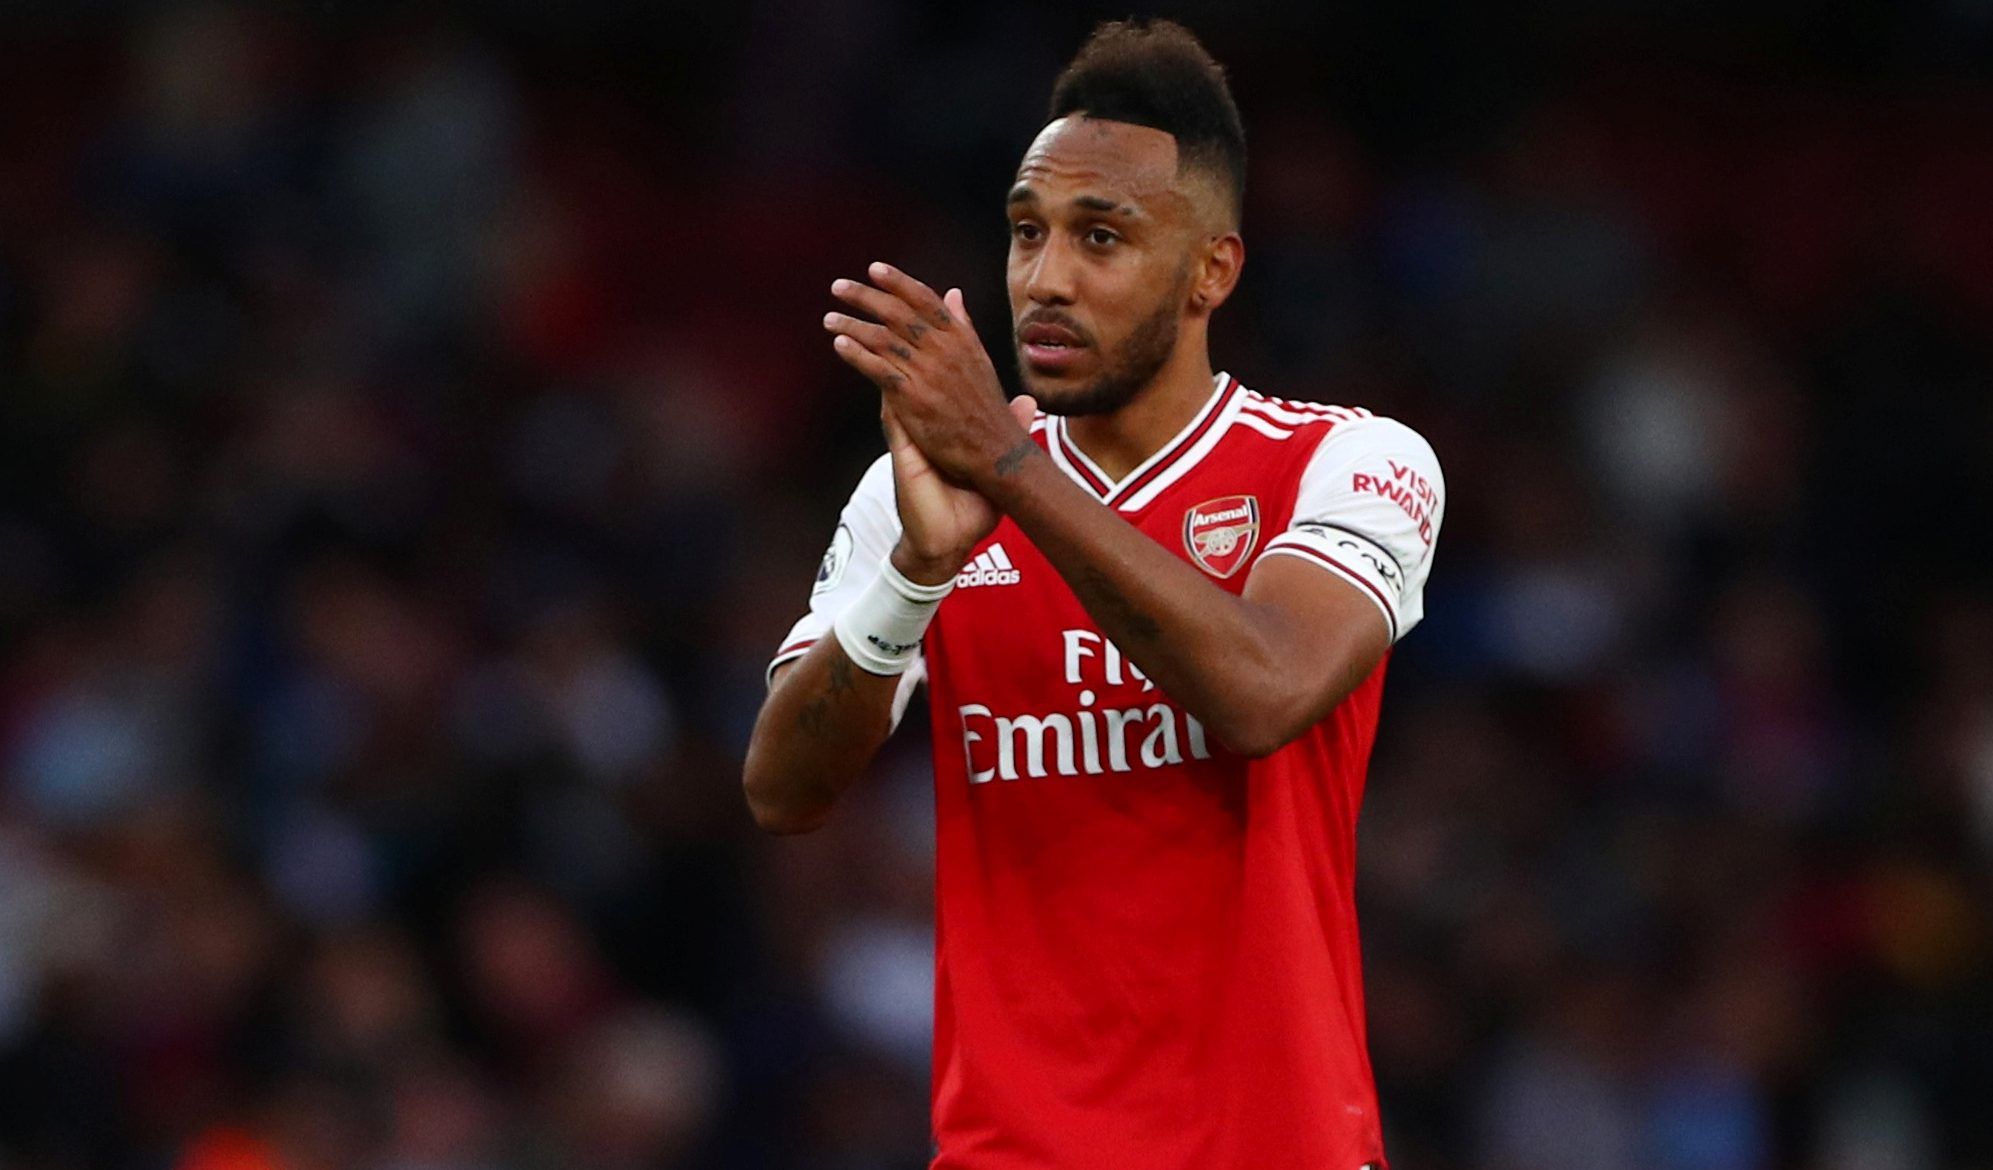 Soccer Football - Premier League - Arsenal v Aston Villa - Emirates Stadium, London, Britain - September 22, 2019  Arsenal's Pierre-Emerick Aubameyang celebrates after the match   REUTERS/Hannah McKay  EDITORIAL USE ONLY. No use with unauthorized audio, video, data, fixture lists, club/league logos or 